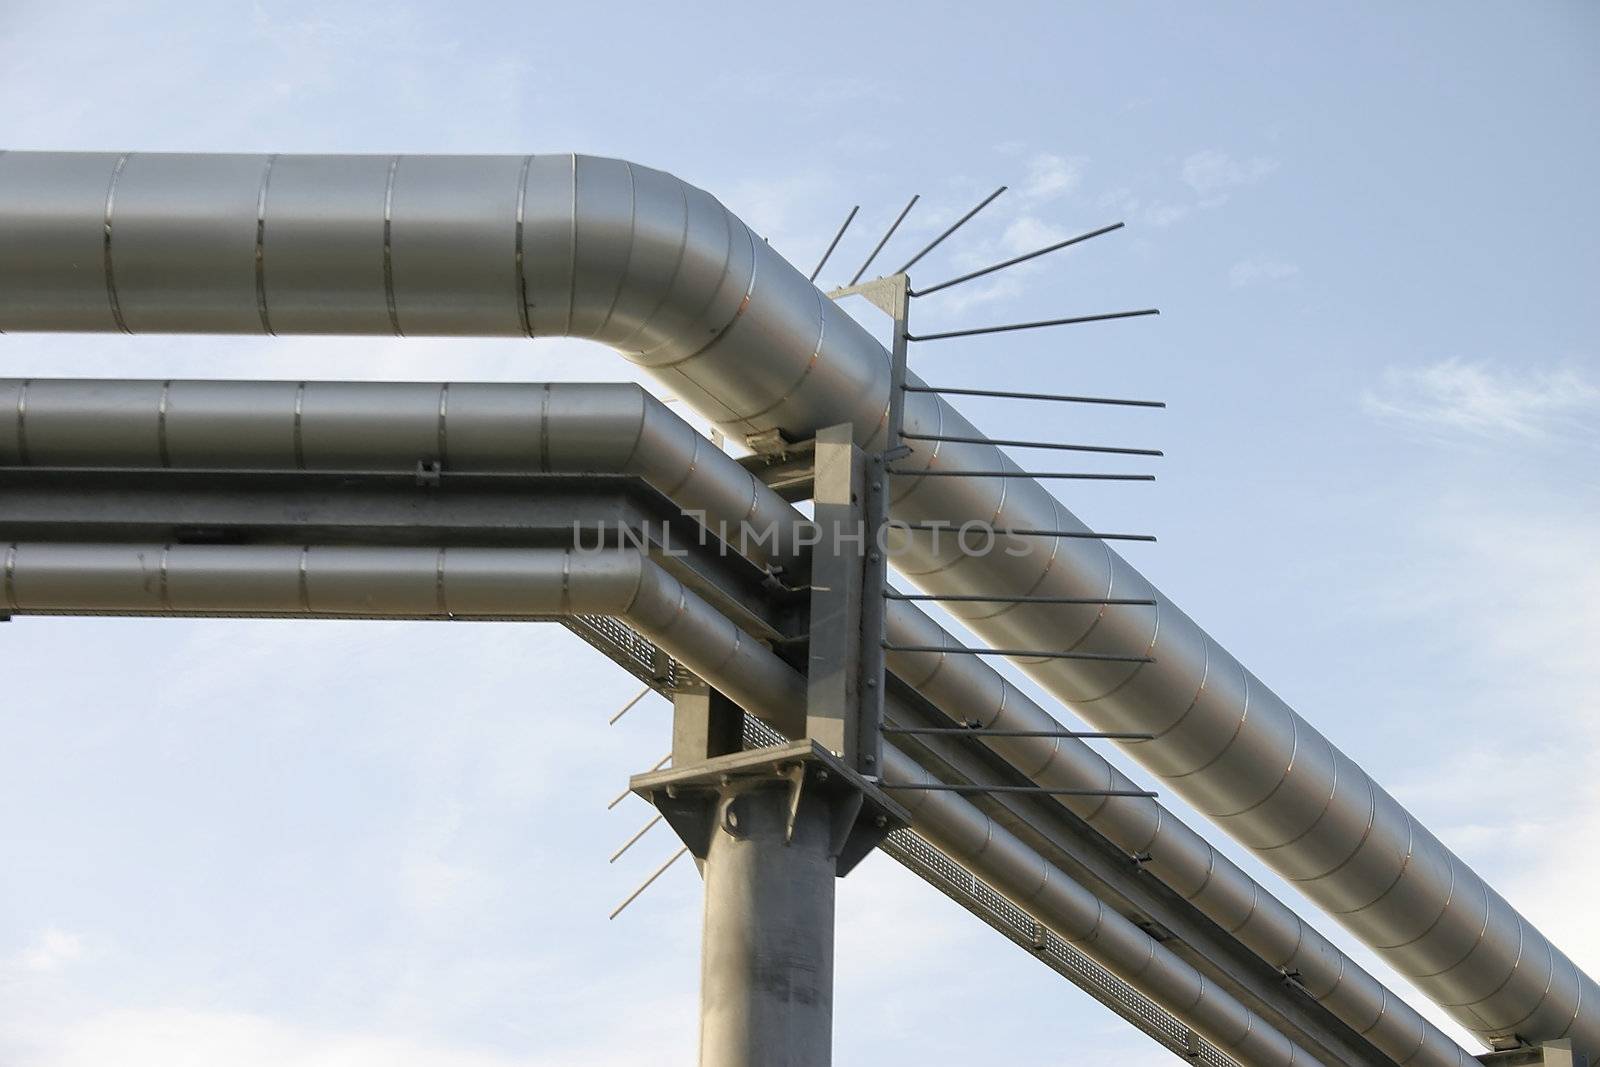 Stainless Teel Pipes with Climb Protection